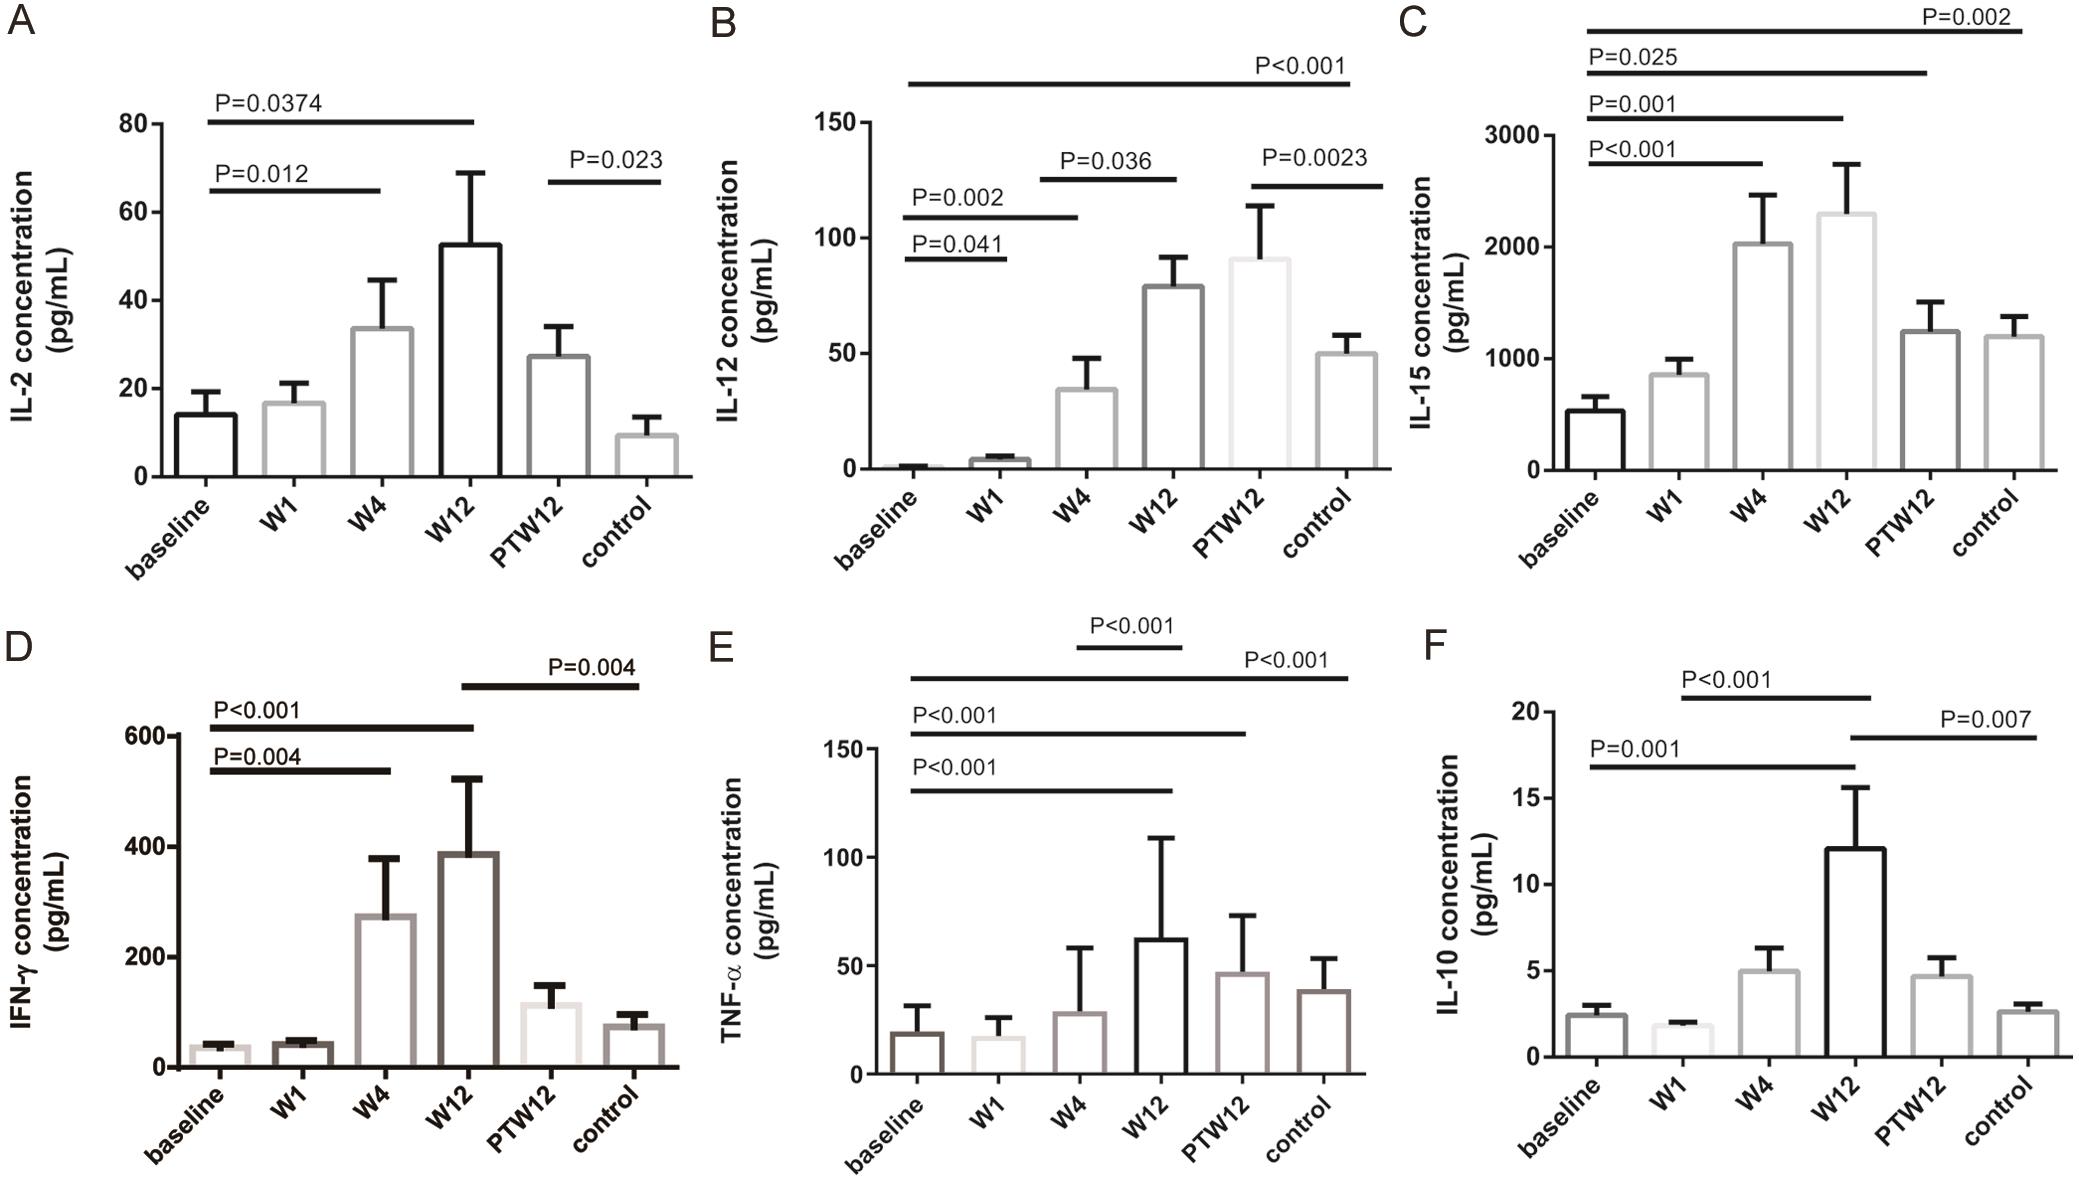 Alteration of NK cell-associated cytokines in the serum of chronic hepatitis C patients during and after direct-acting antiviral therapy, including IL2, IL12, IL15, IFN-γ, TNF-α, and IL10.